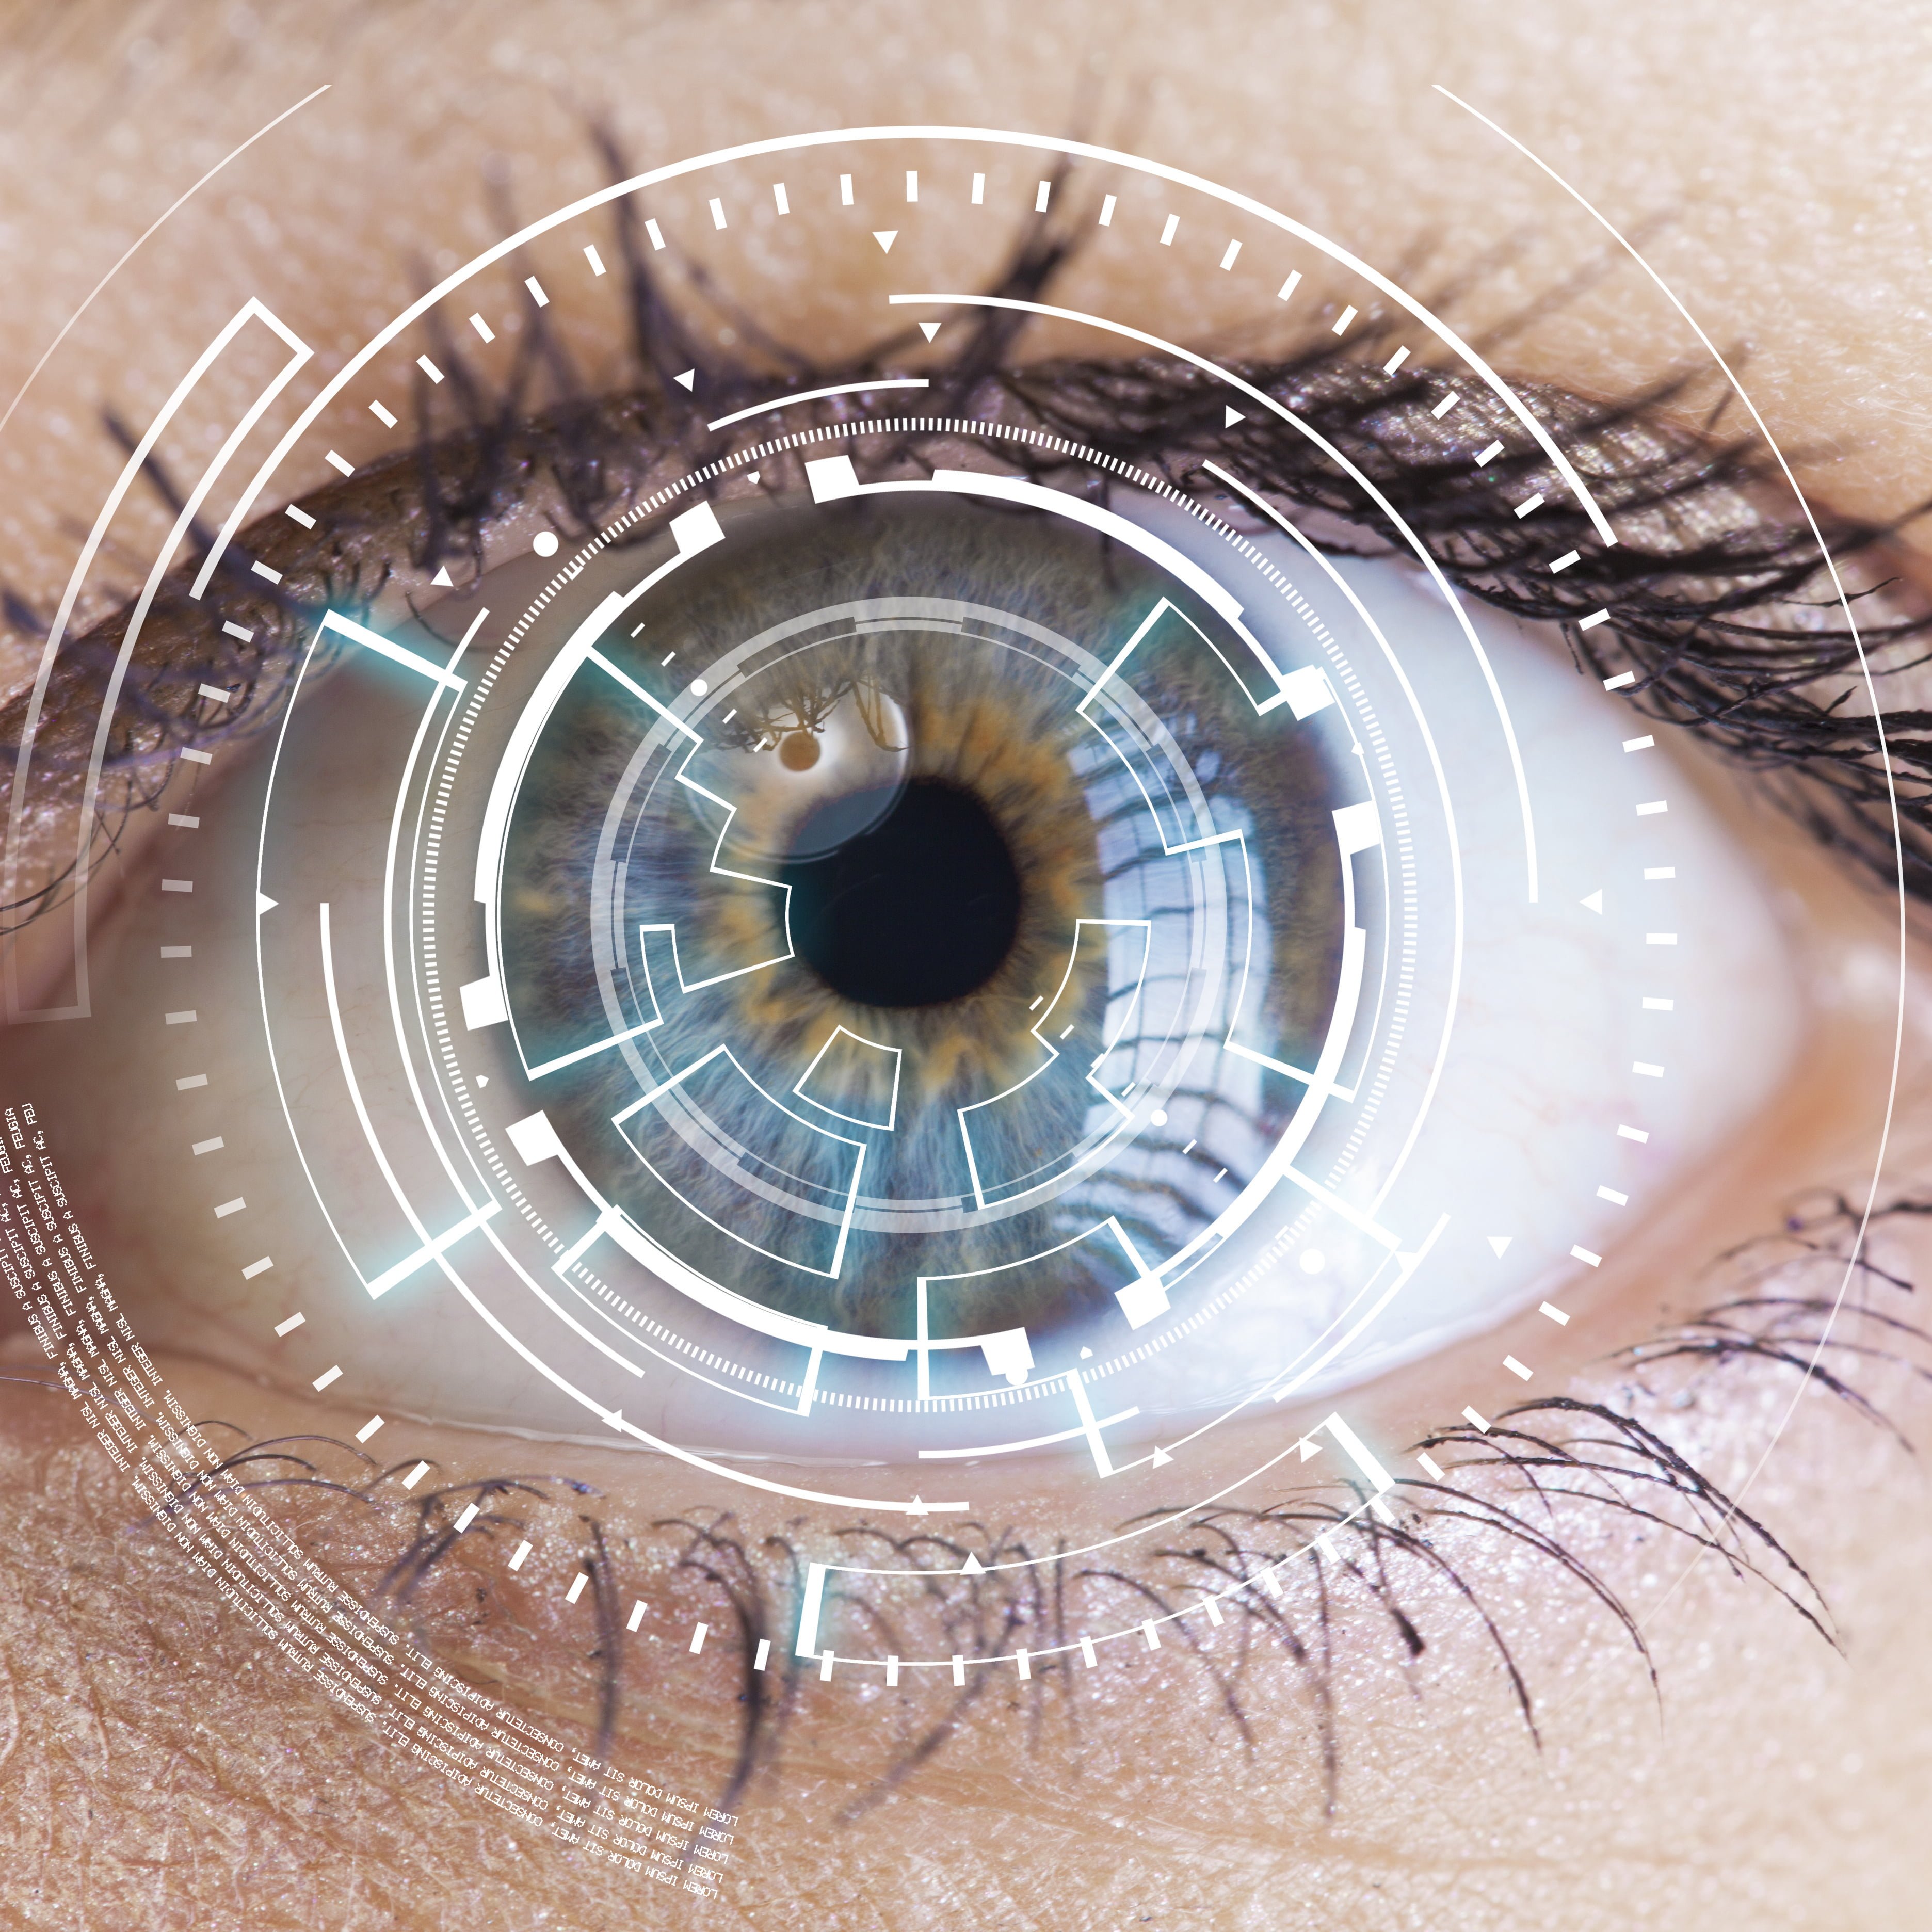 Eyes of technologies in the futuristic